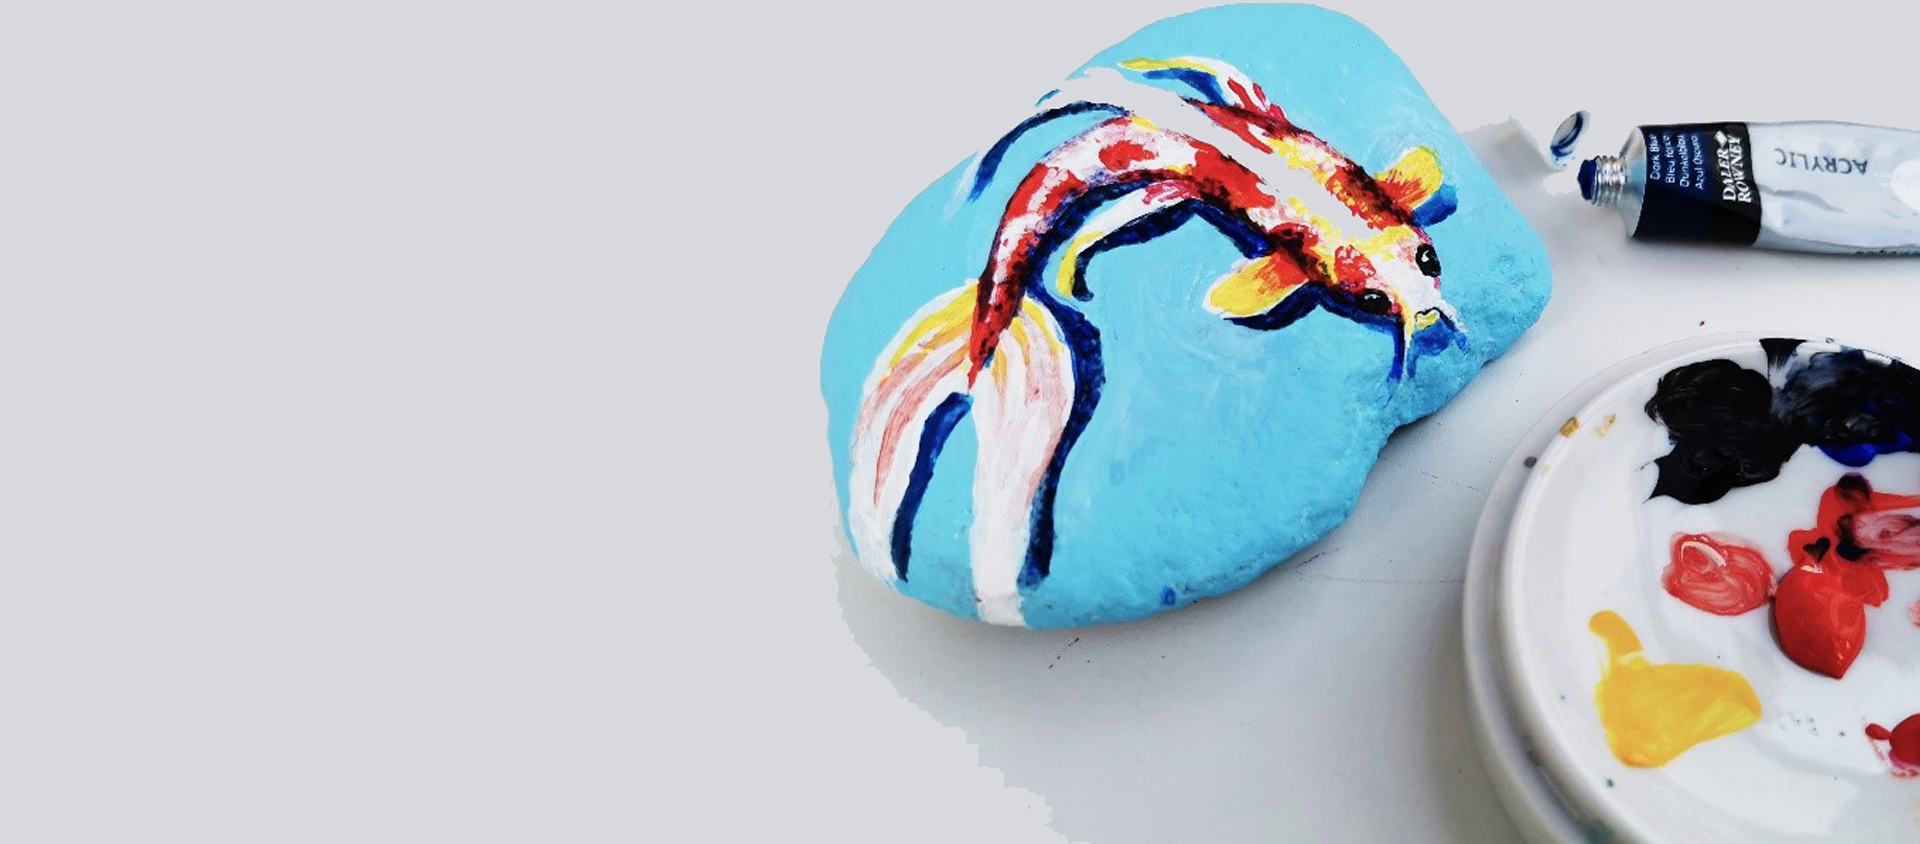 How to create painted stone art